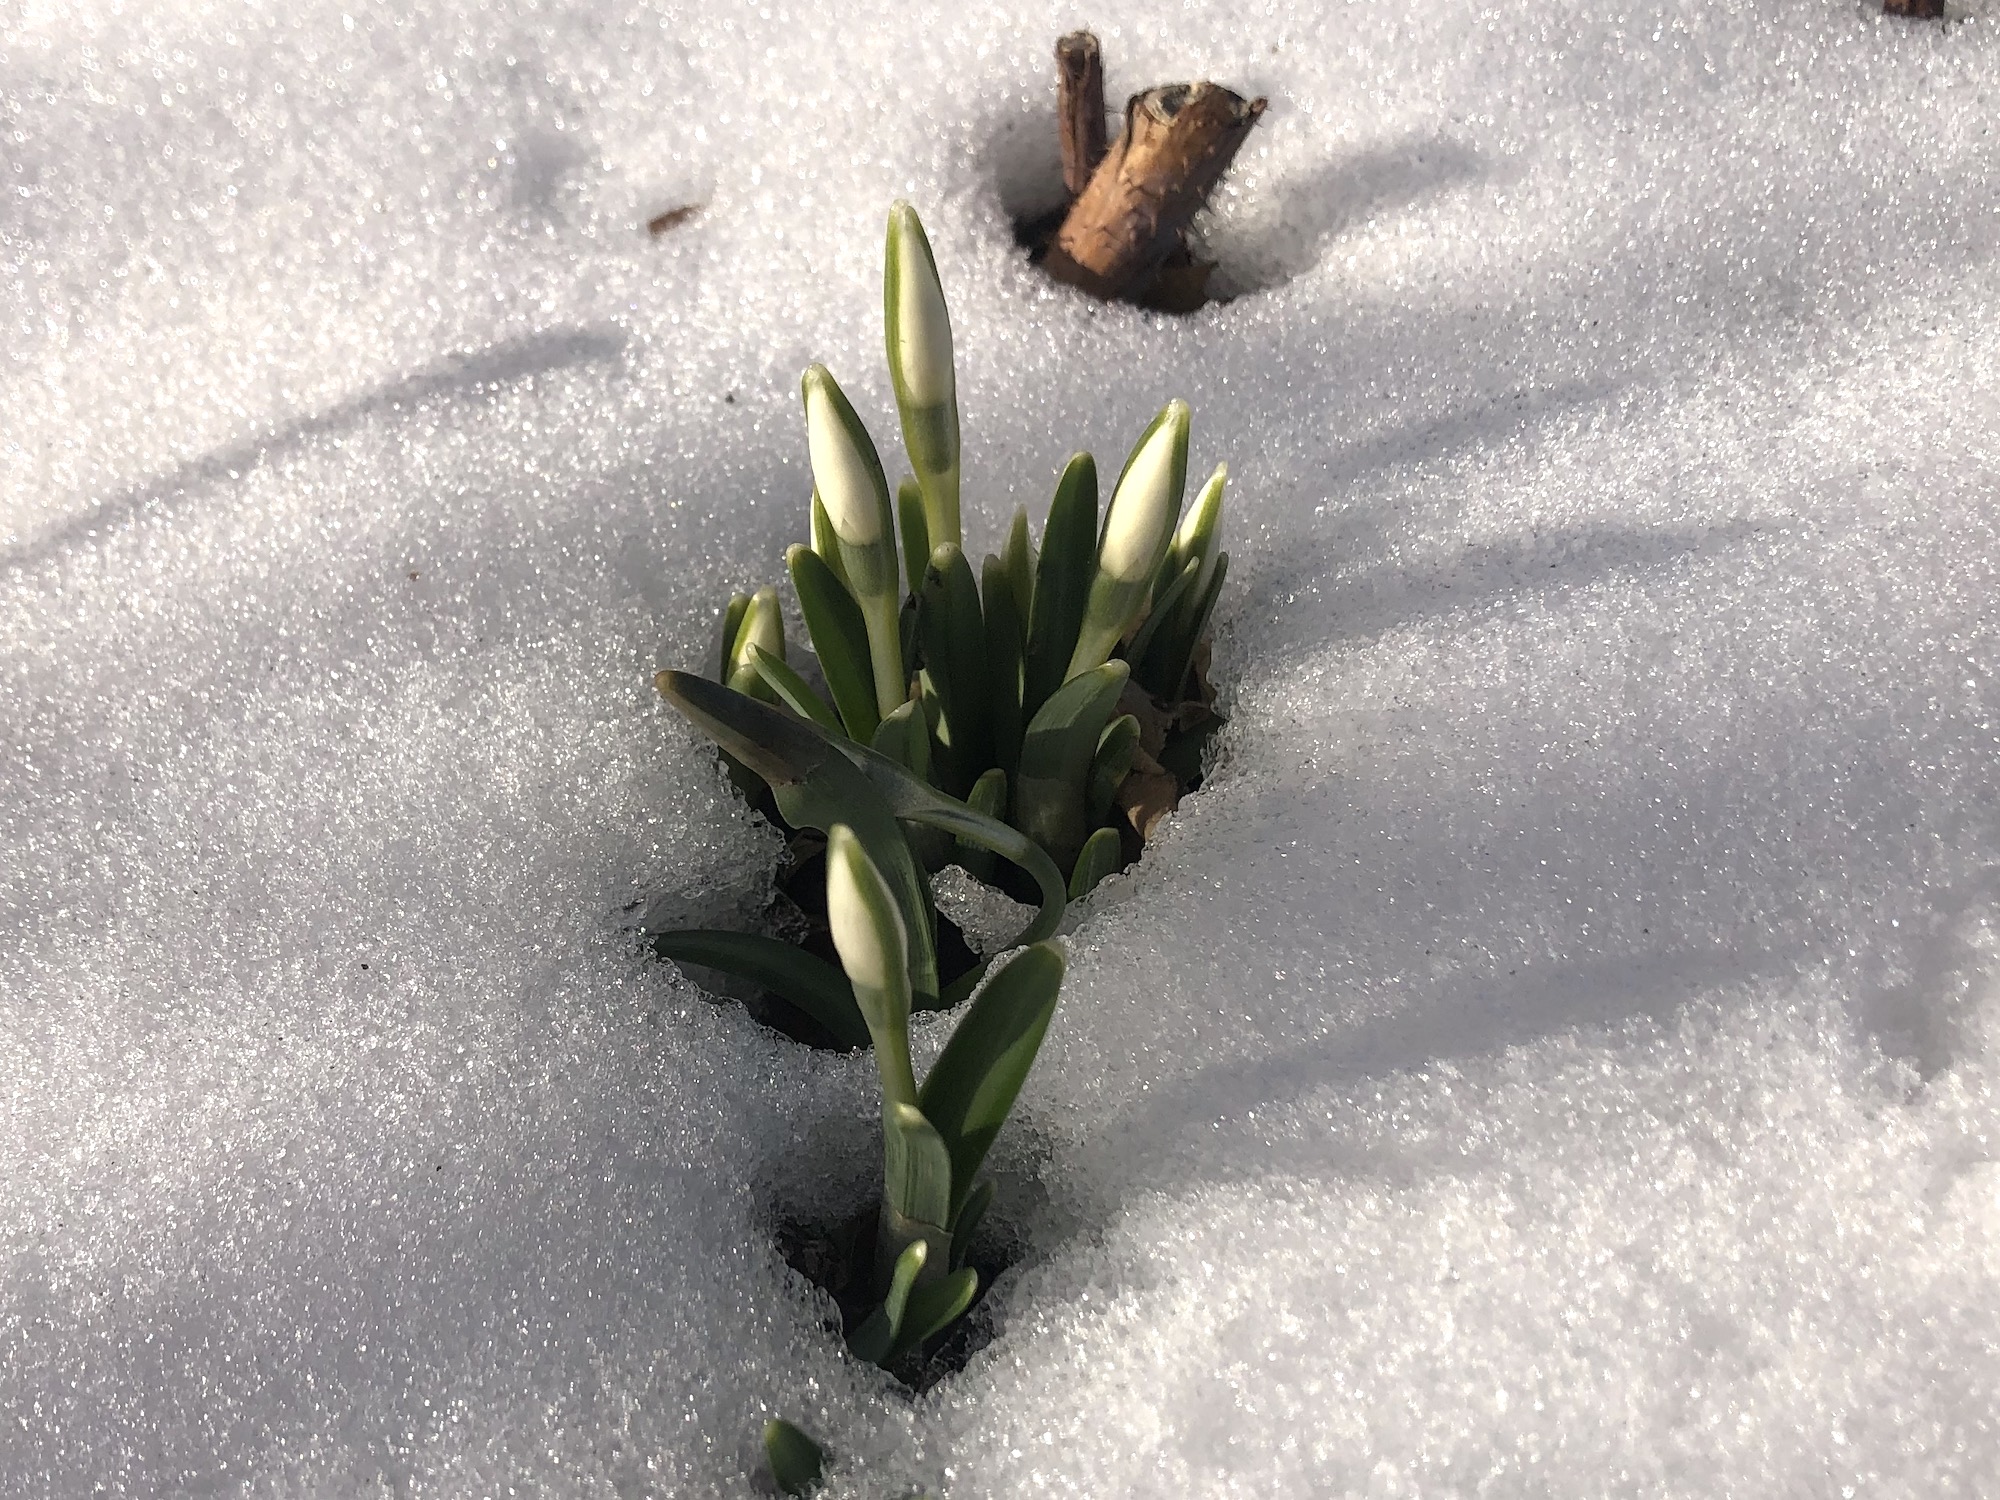 nowdrops emerging through the snow in woods off of Arbor Drive on February 19, 2023.